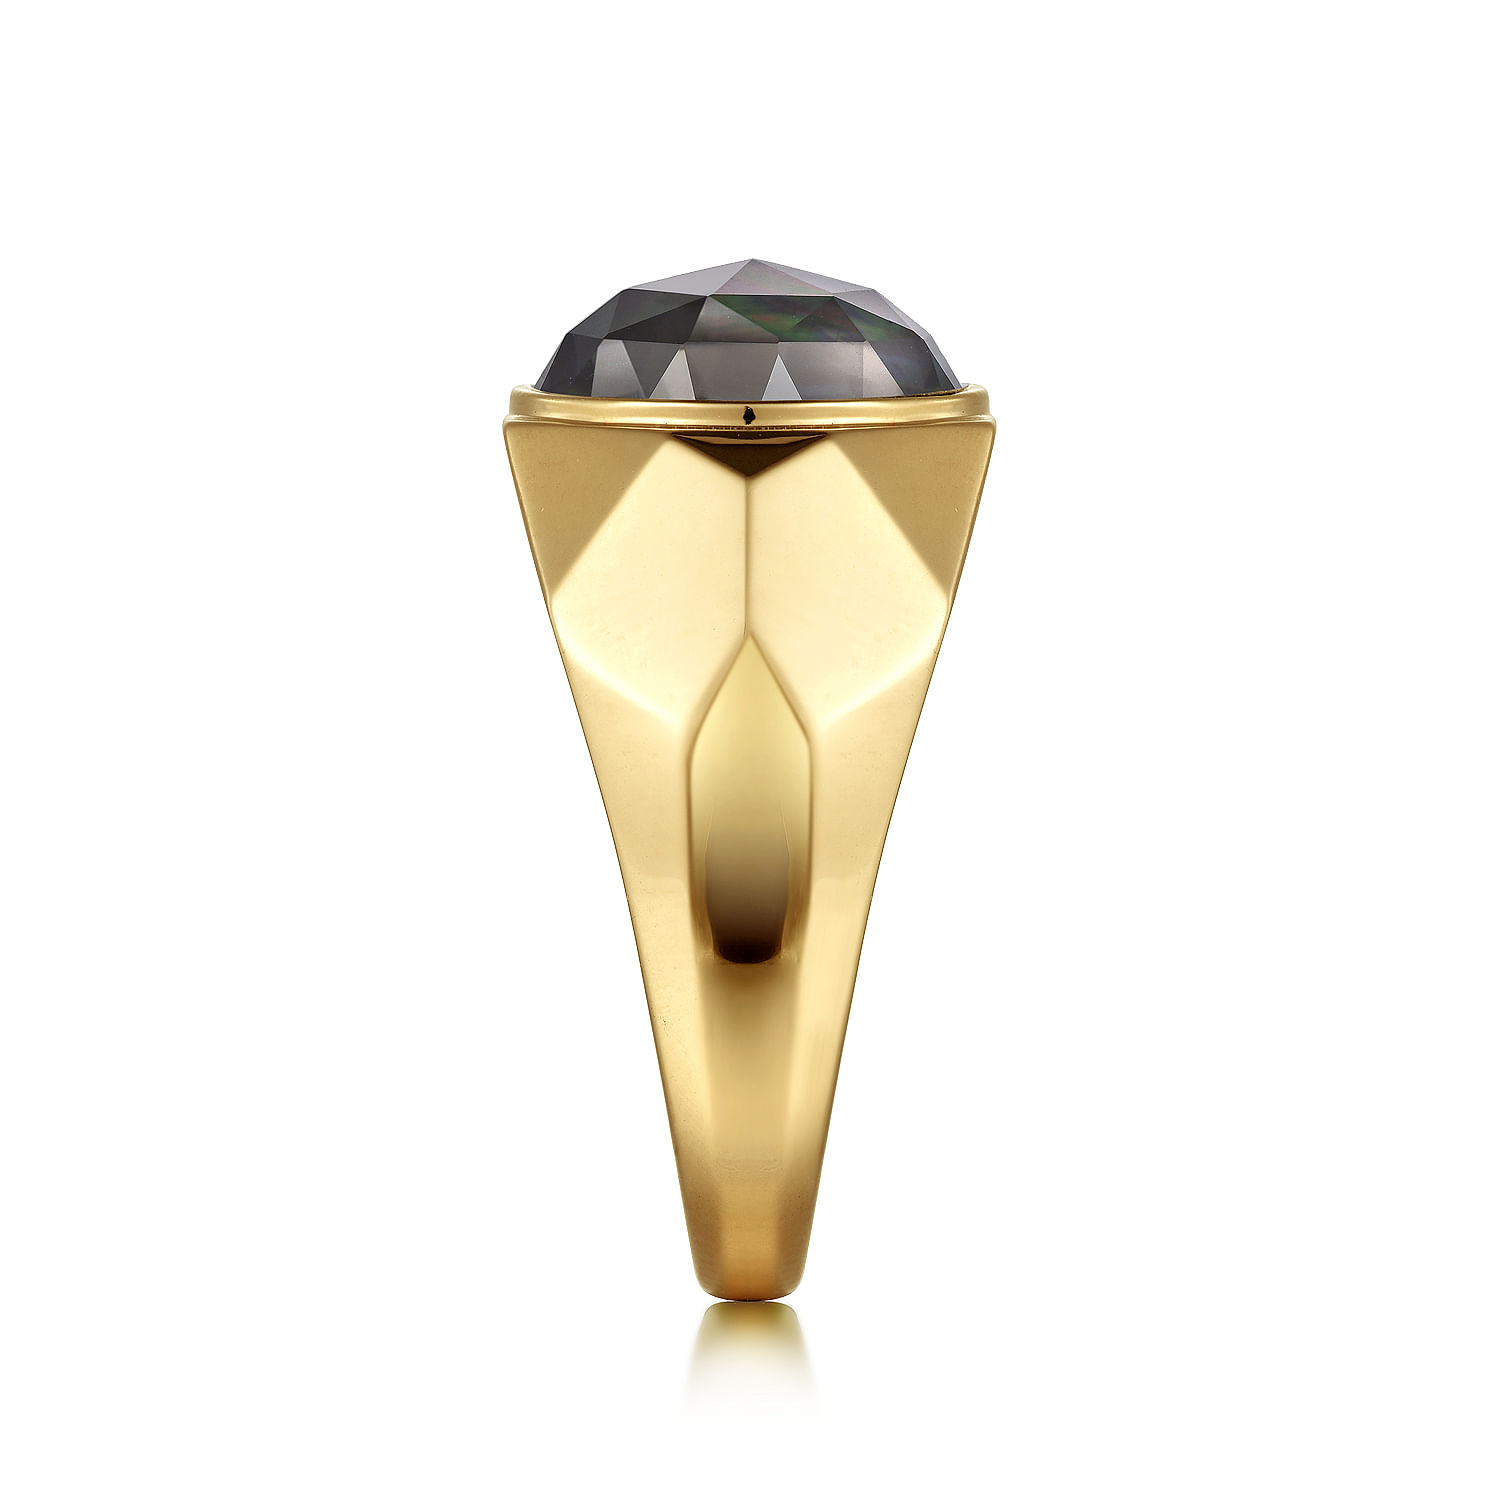 Wide 14K Yellow Gold Signet Ring with Black Mother of Pearl Stone in High Polished Finish